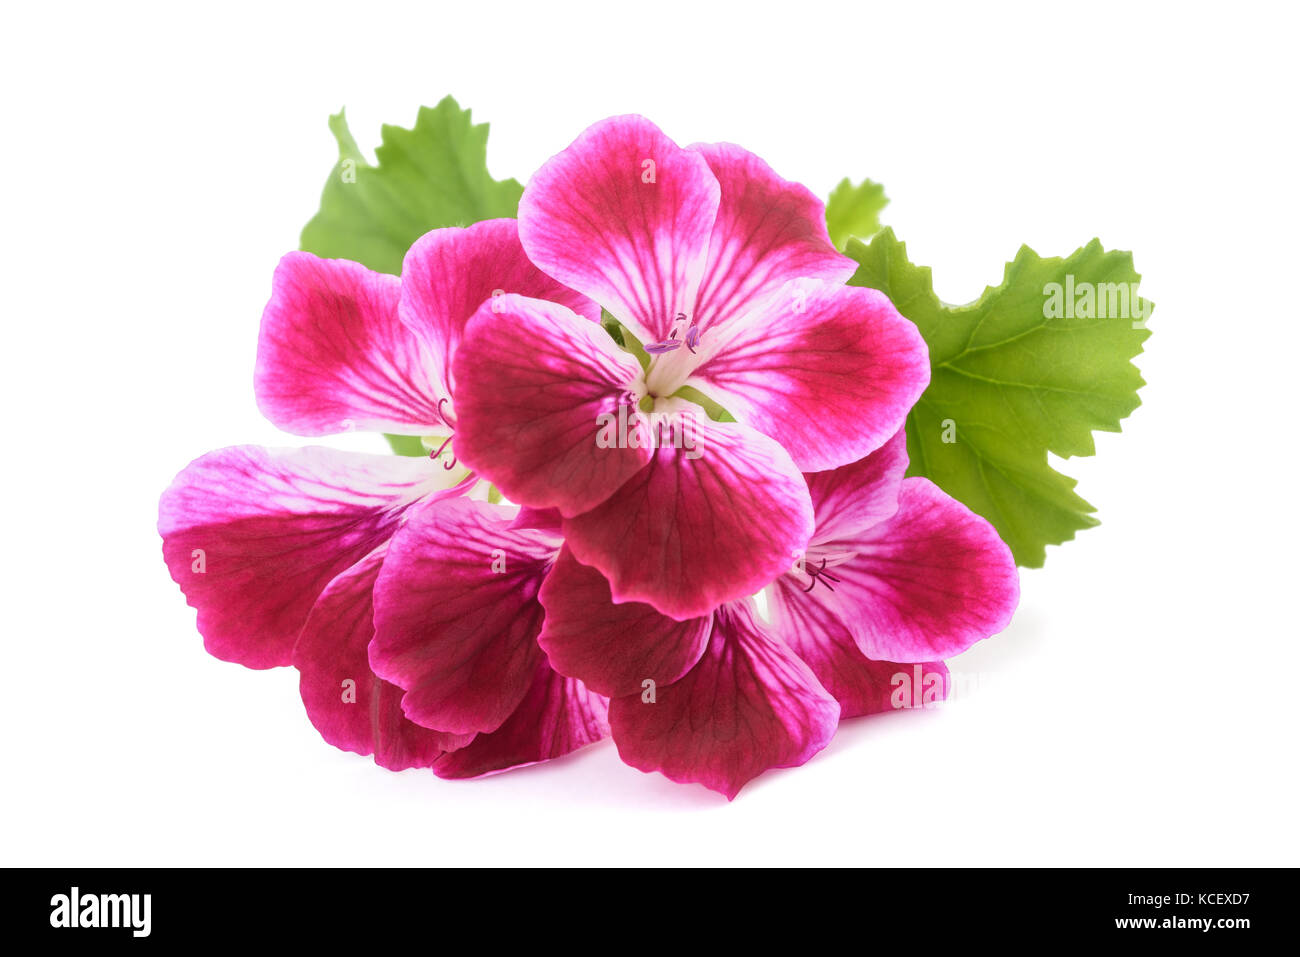 Scented Geranium flowers isolated on white background Stock Photo